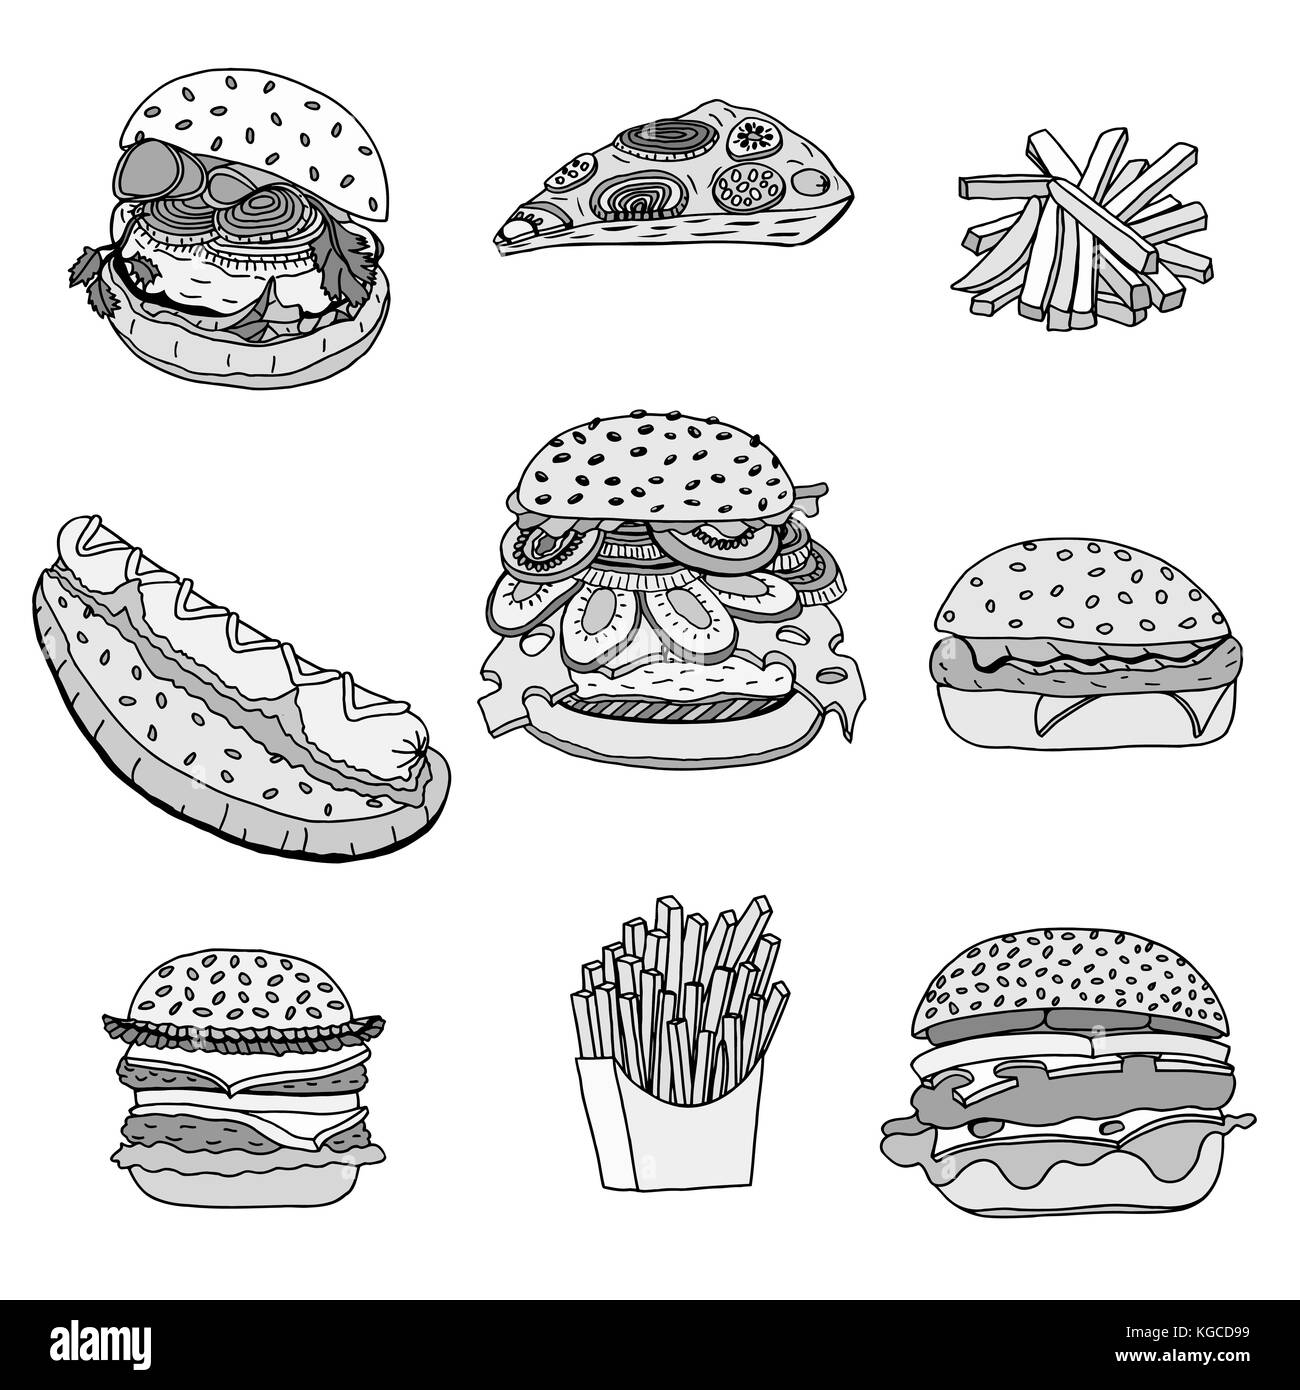 Hand-drawn set of sketchy fast food illustrations, burgers, hot dogs, French fries and pizza. Vector illustration, isolated on white Stock Vector